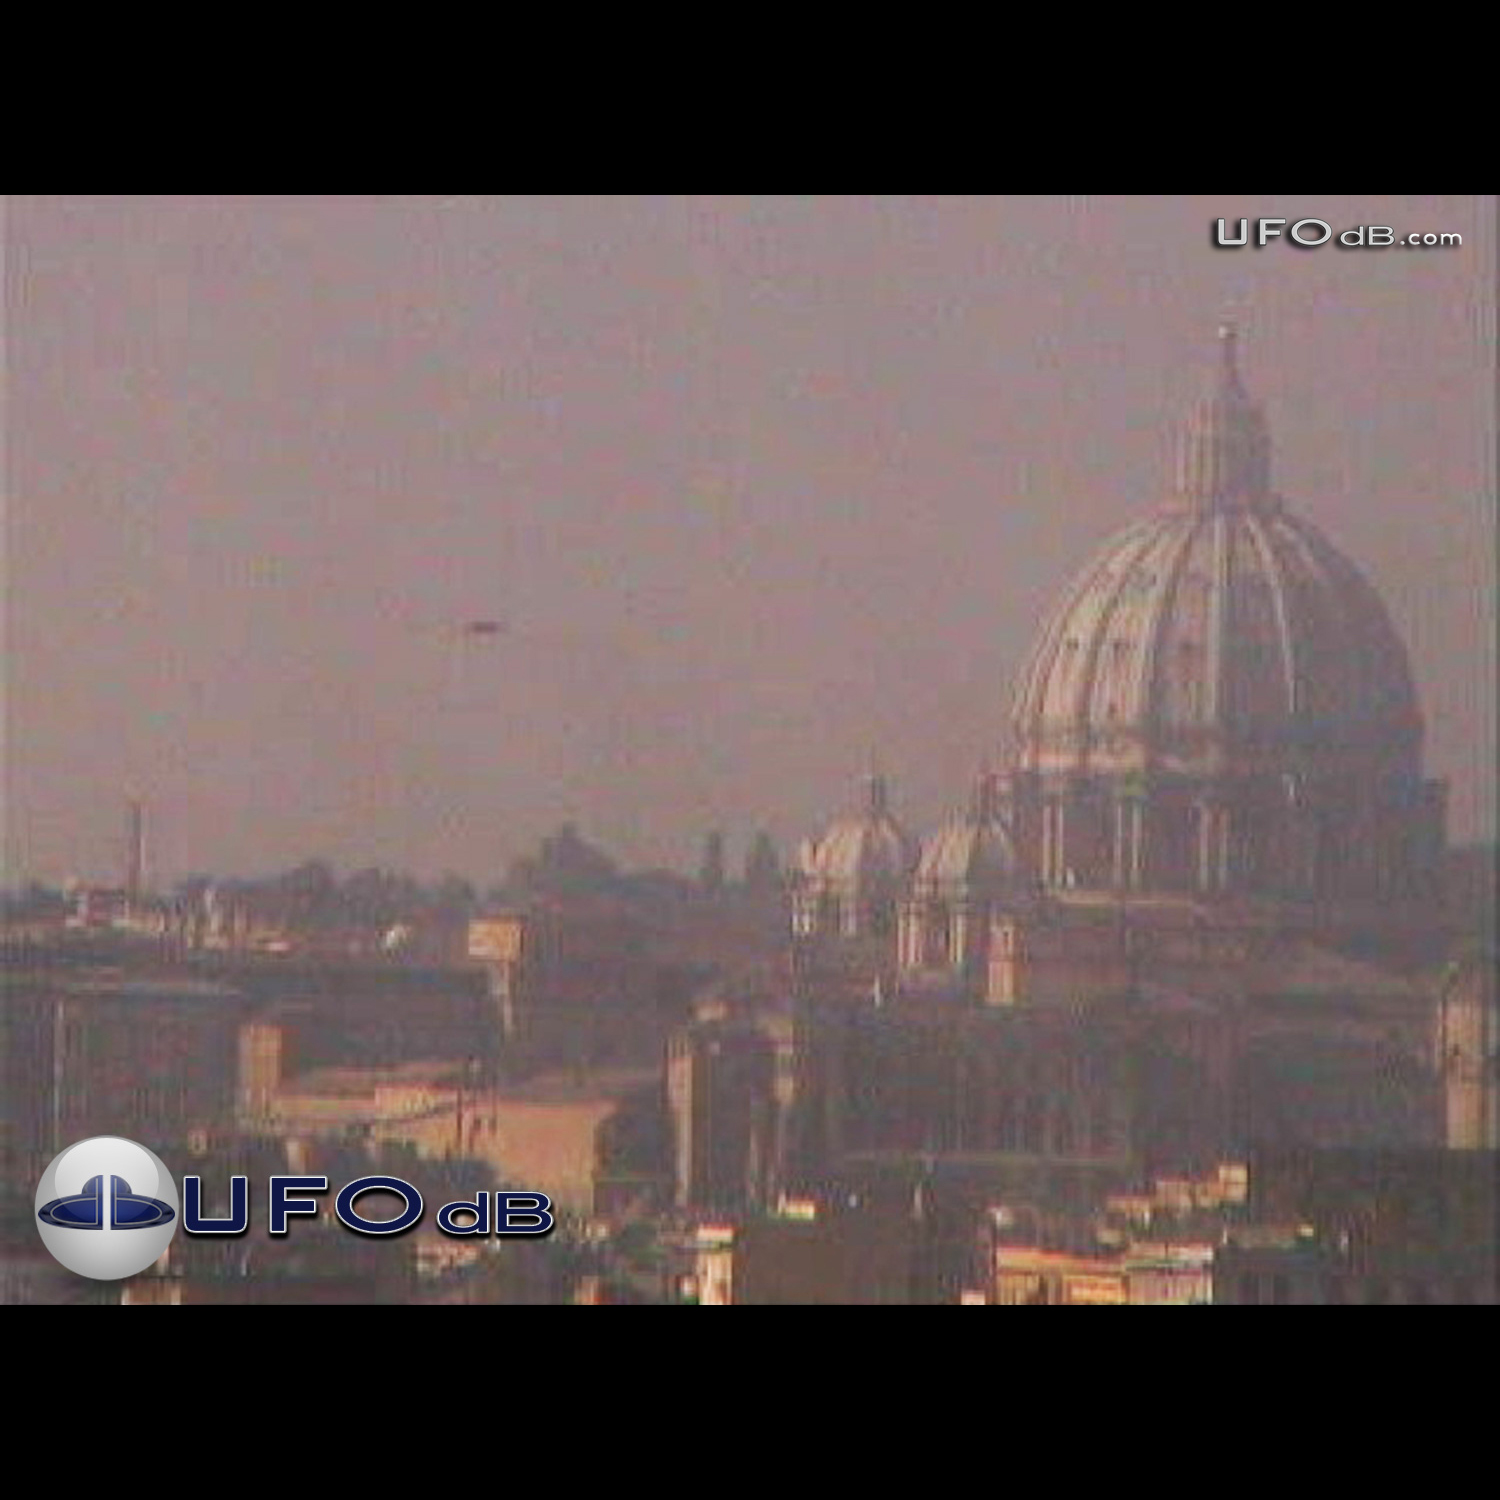 Live cam capture picture of UFO over Vatican city | Italy | May 6 2011 UFO Picture #285-1